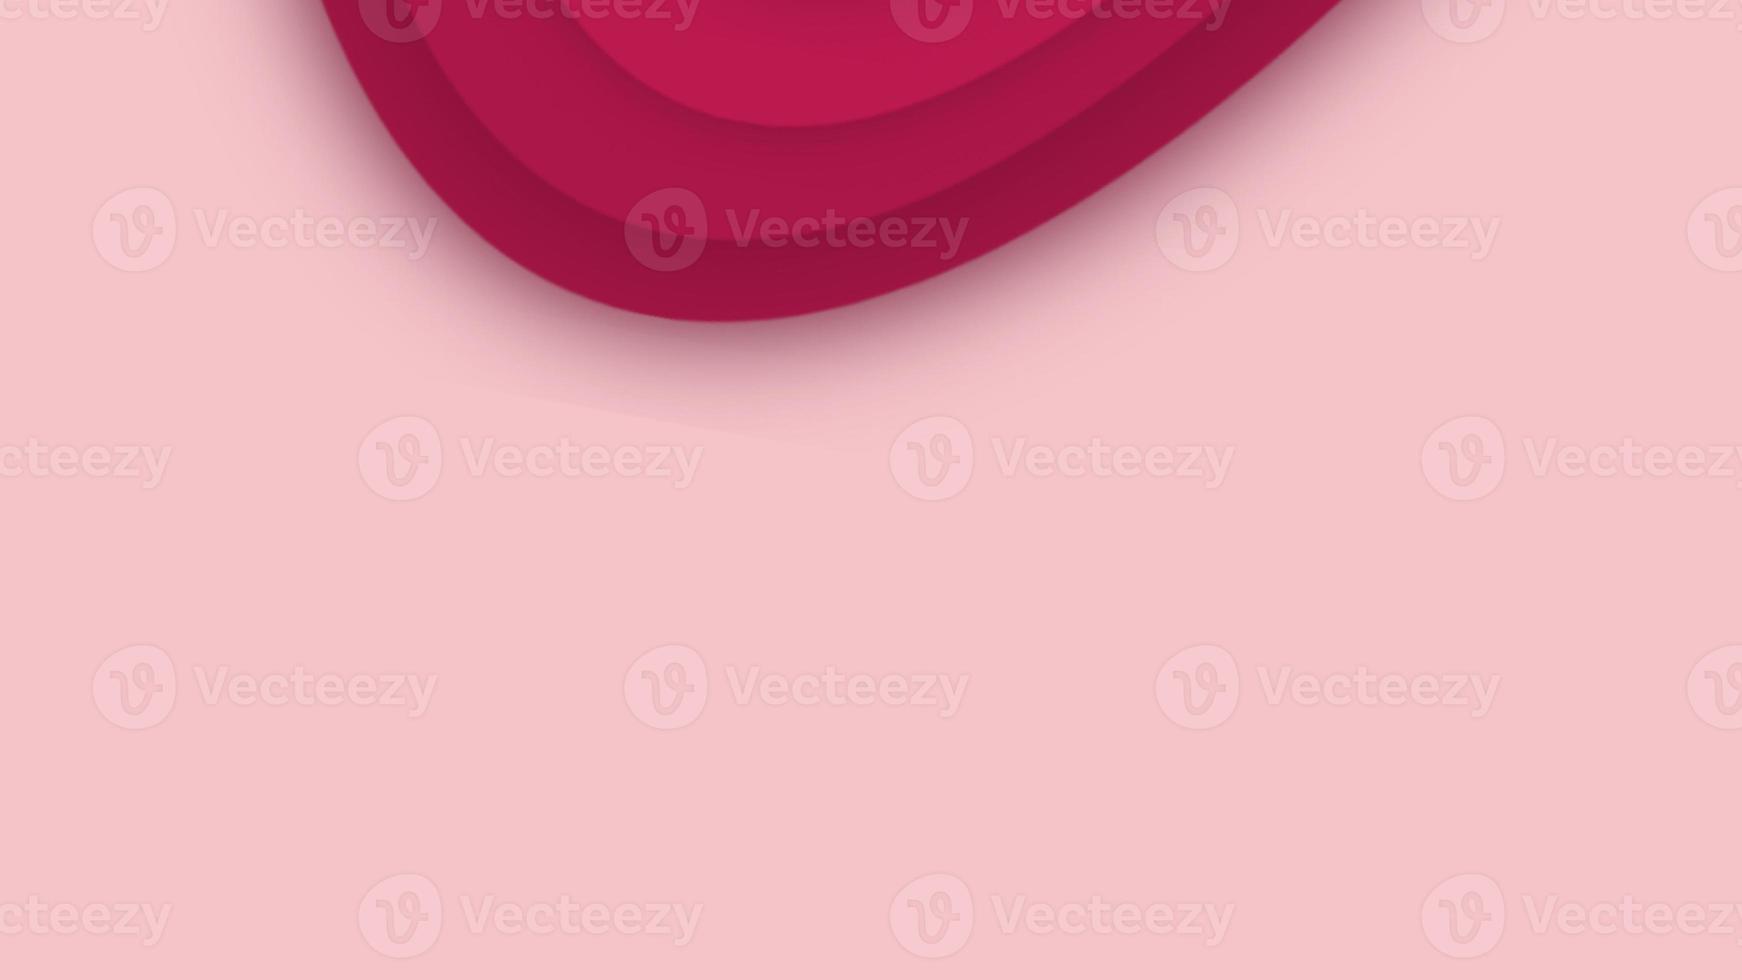 Land or liquid abstract and pattern backgrounds illustration with gradient color of red pink. This background is suitable for presentation, poster, wallpaper, personal website, UI and UX experiences. photo